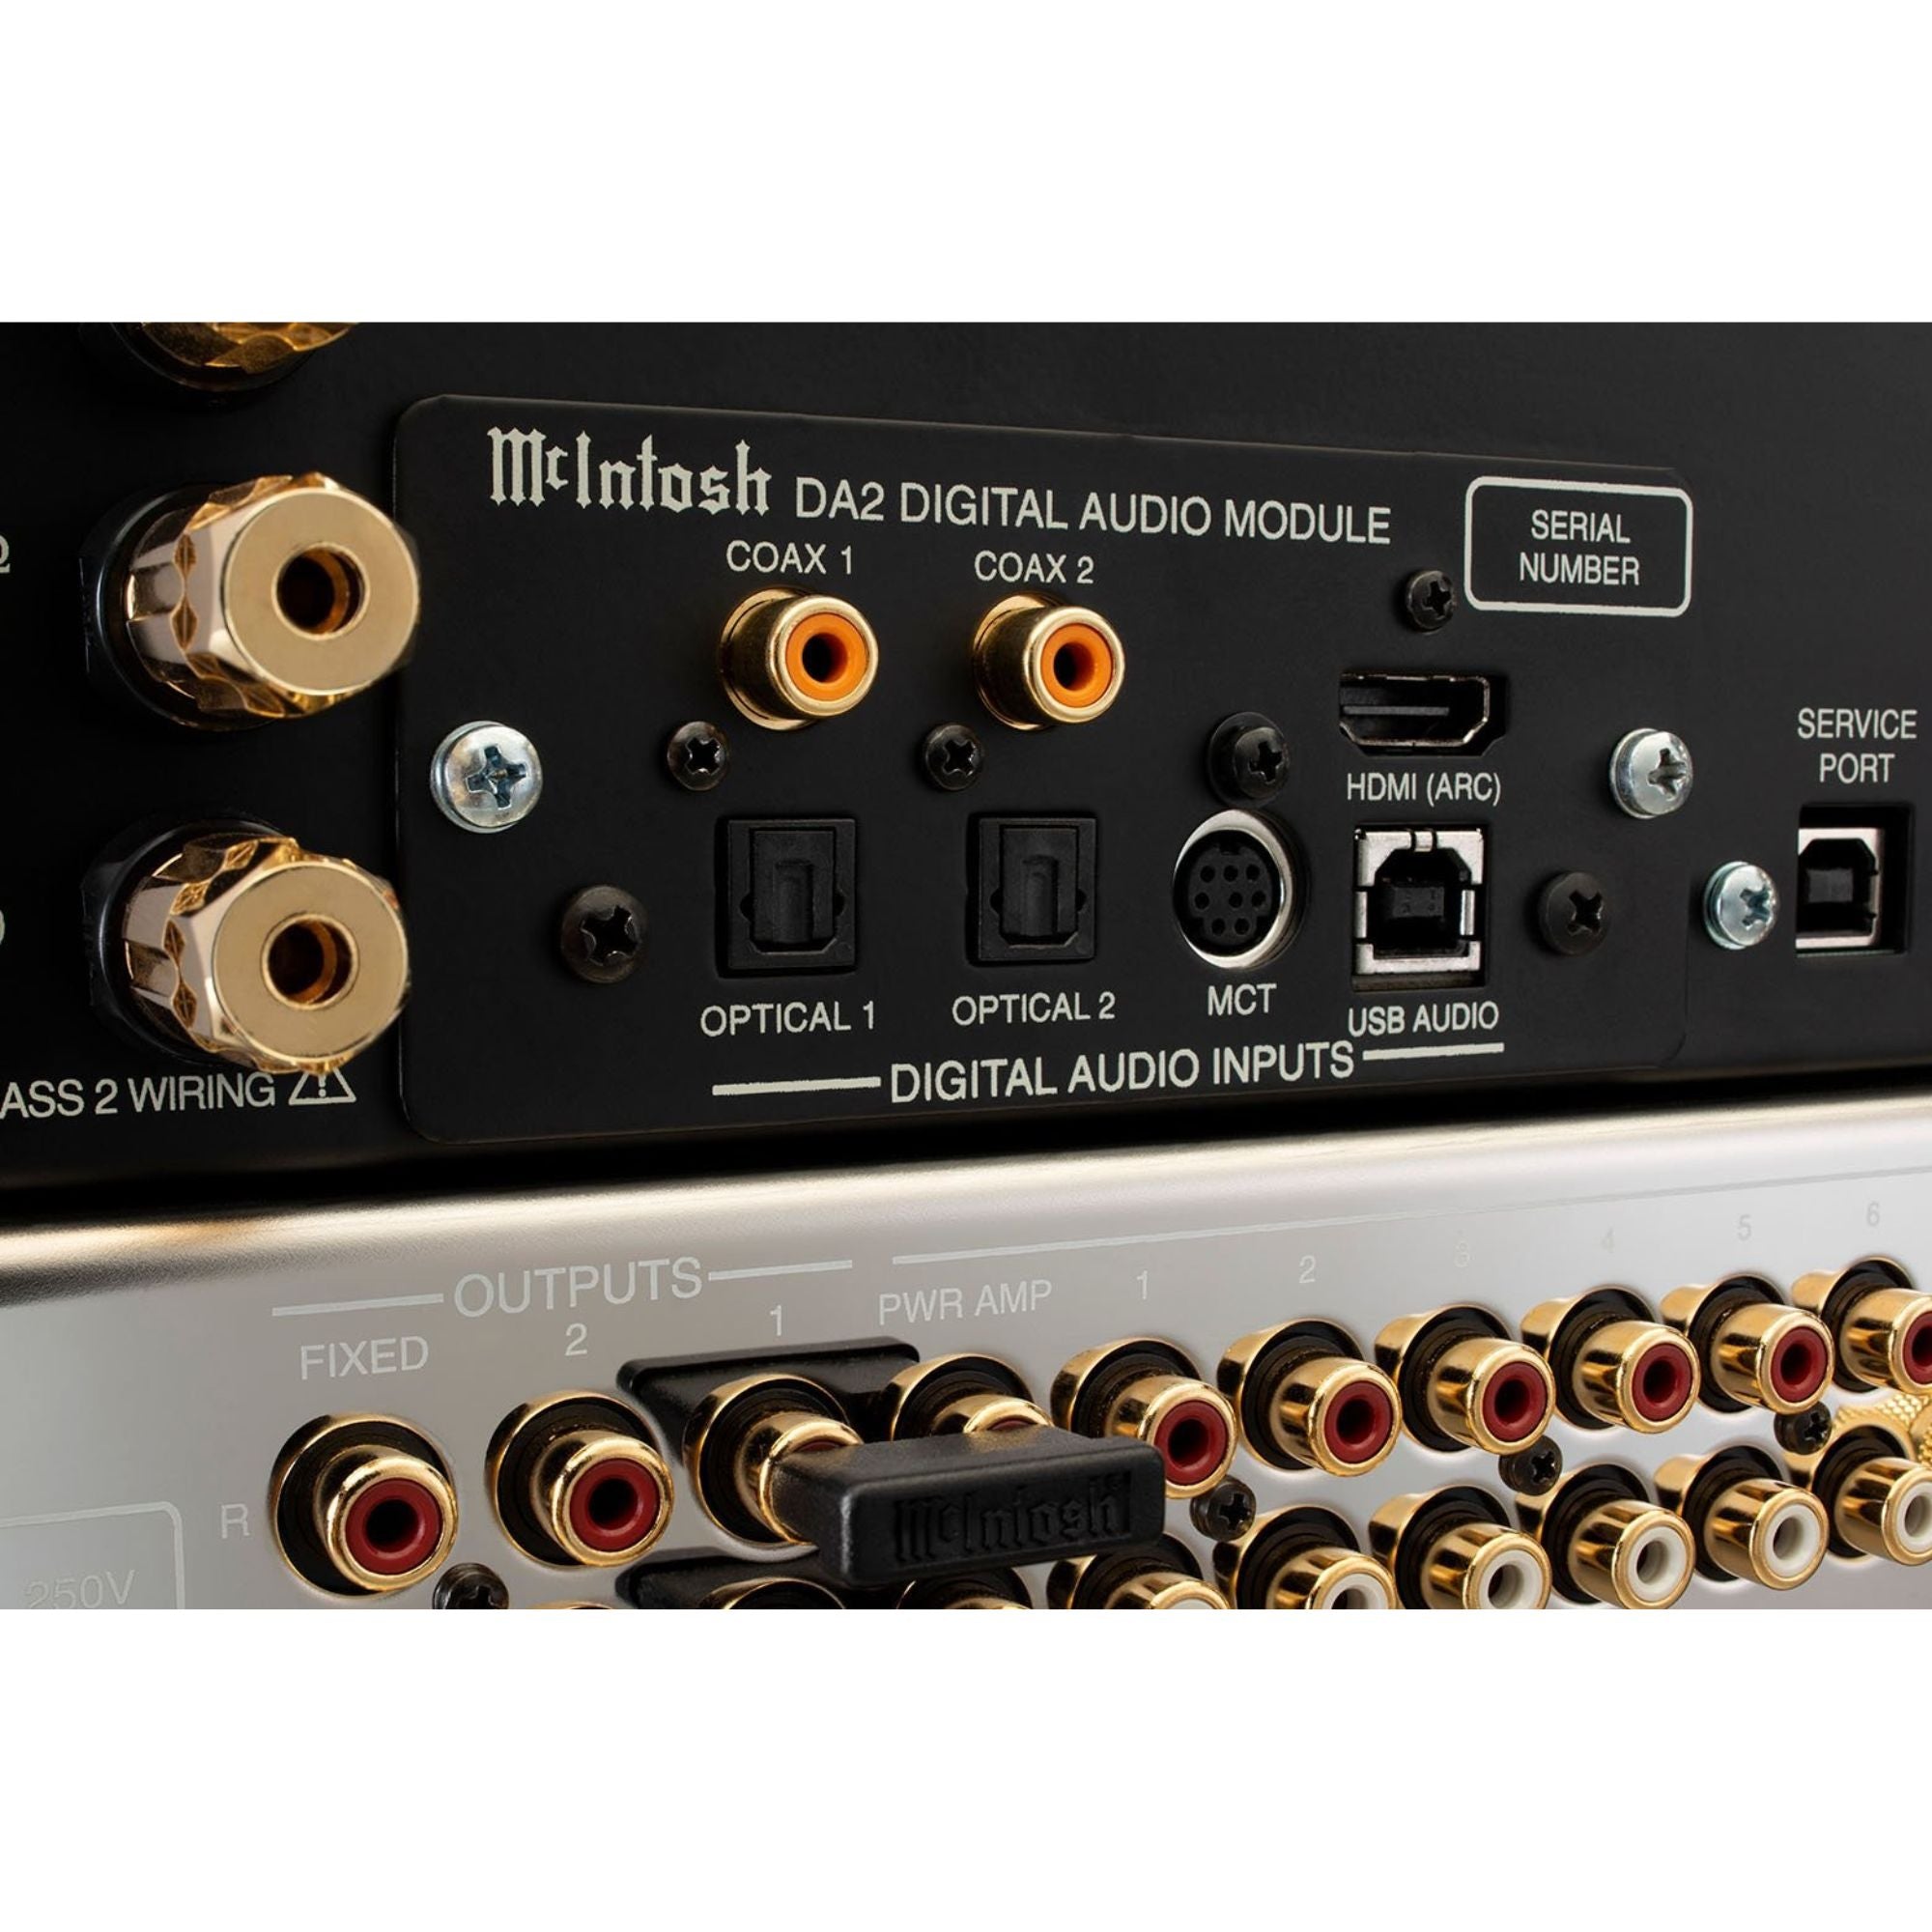 McIntosh Labs MA8950 - 2 Channel Integrated Amplifier - AVStore